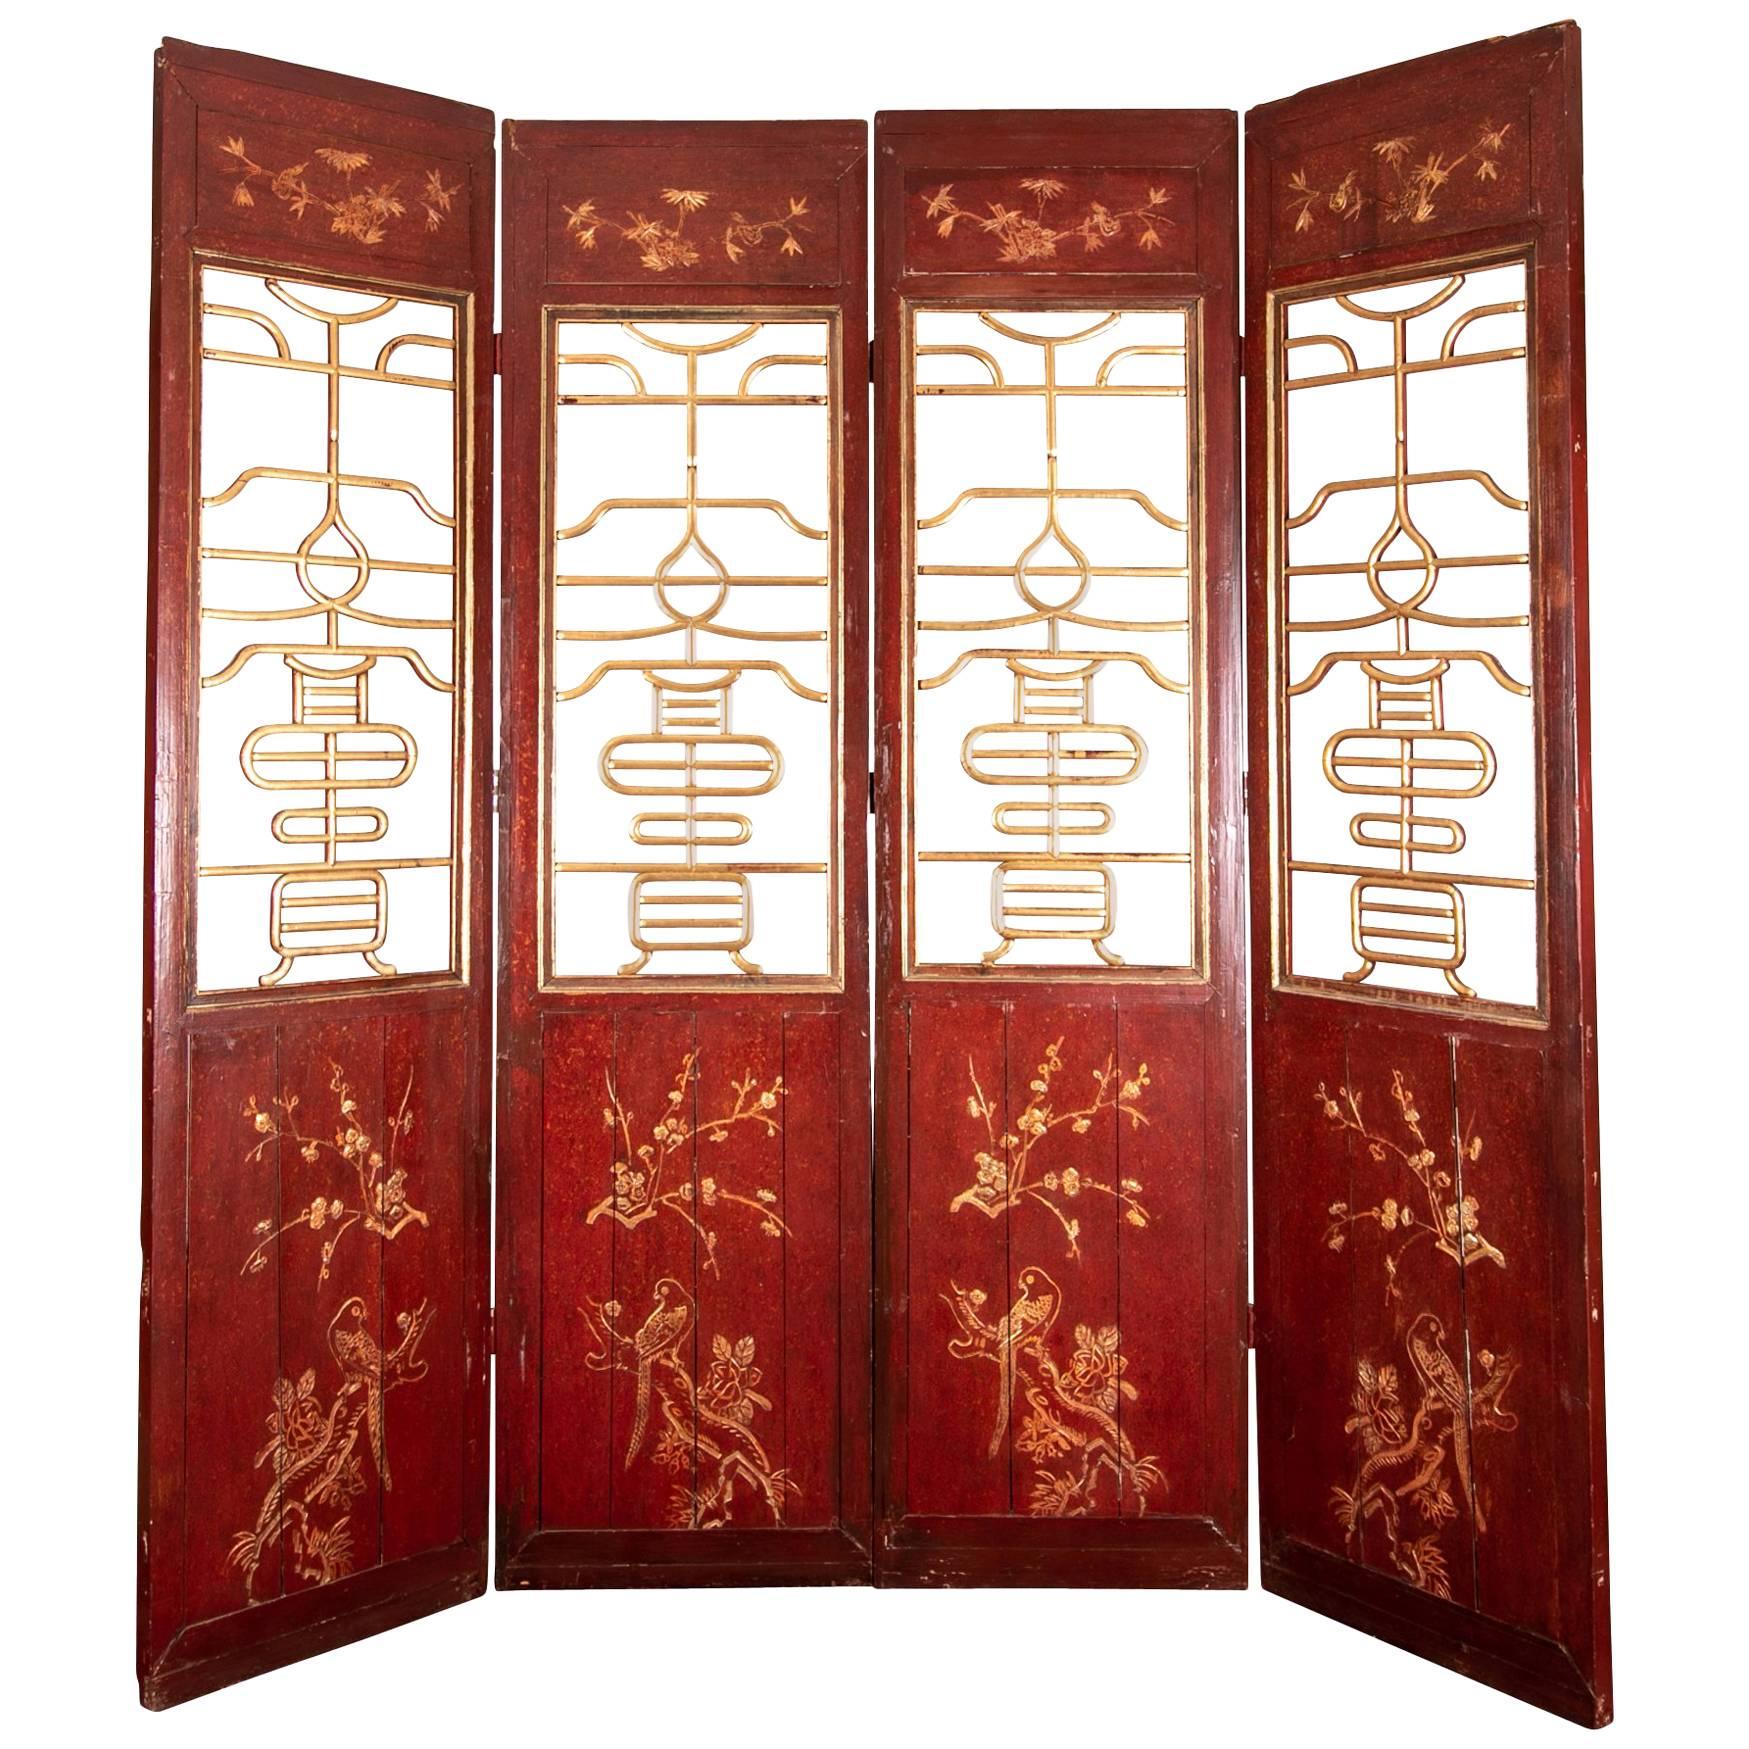 Massive Antique Four Panel Chinese Screen